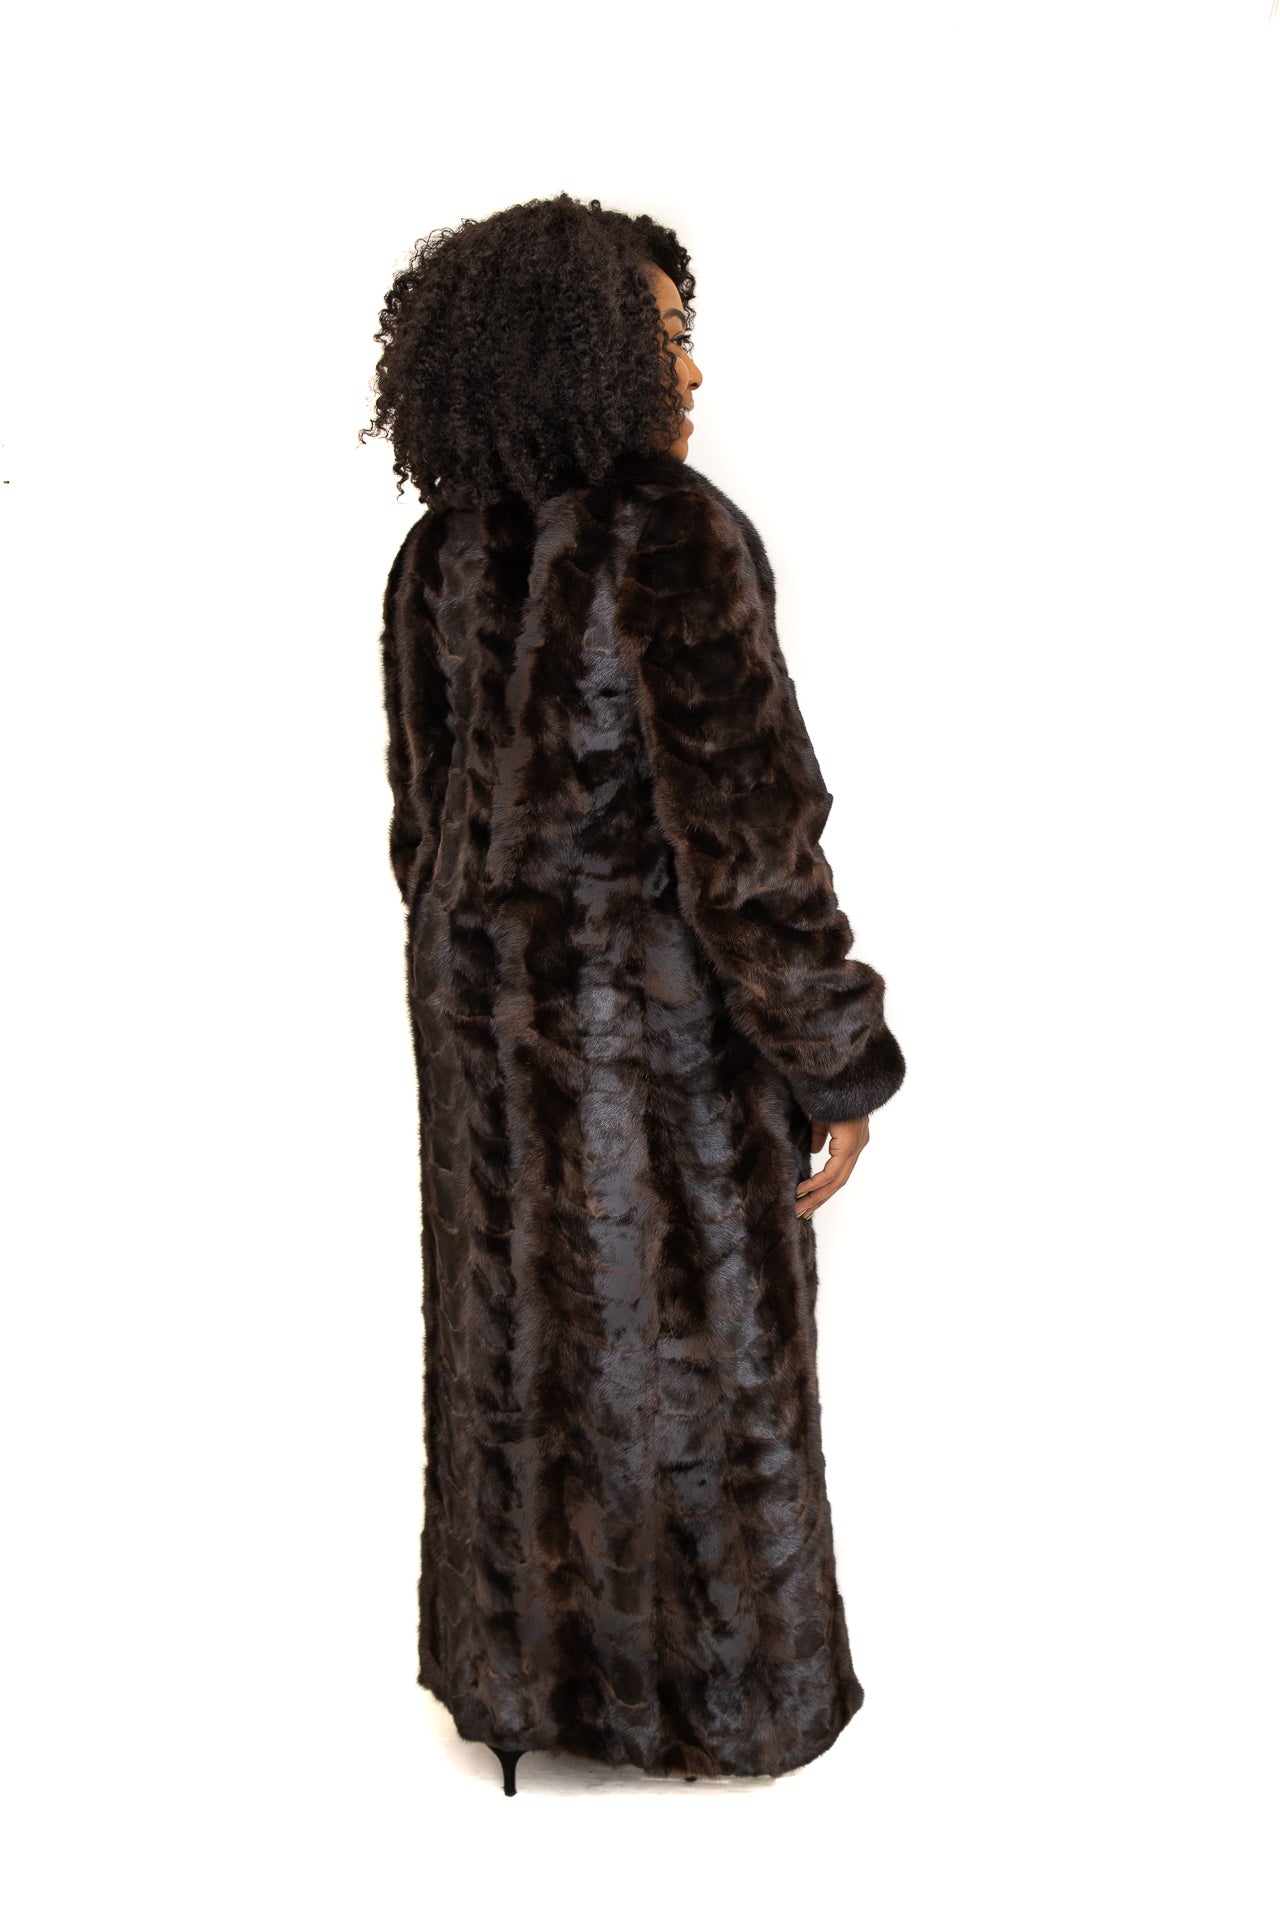 Natural Mahogany Mink Fur Paw Coat with Full Skin Collar and Cuffs Available Cleveland ETON Chagrin & Akron Summit Mall